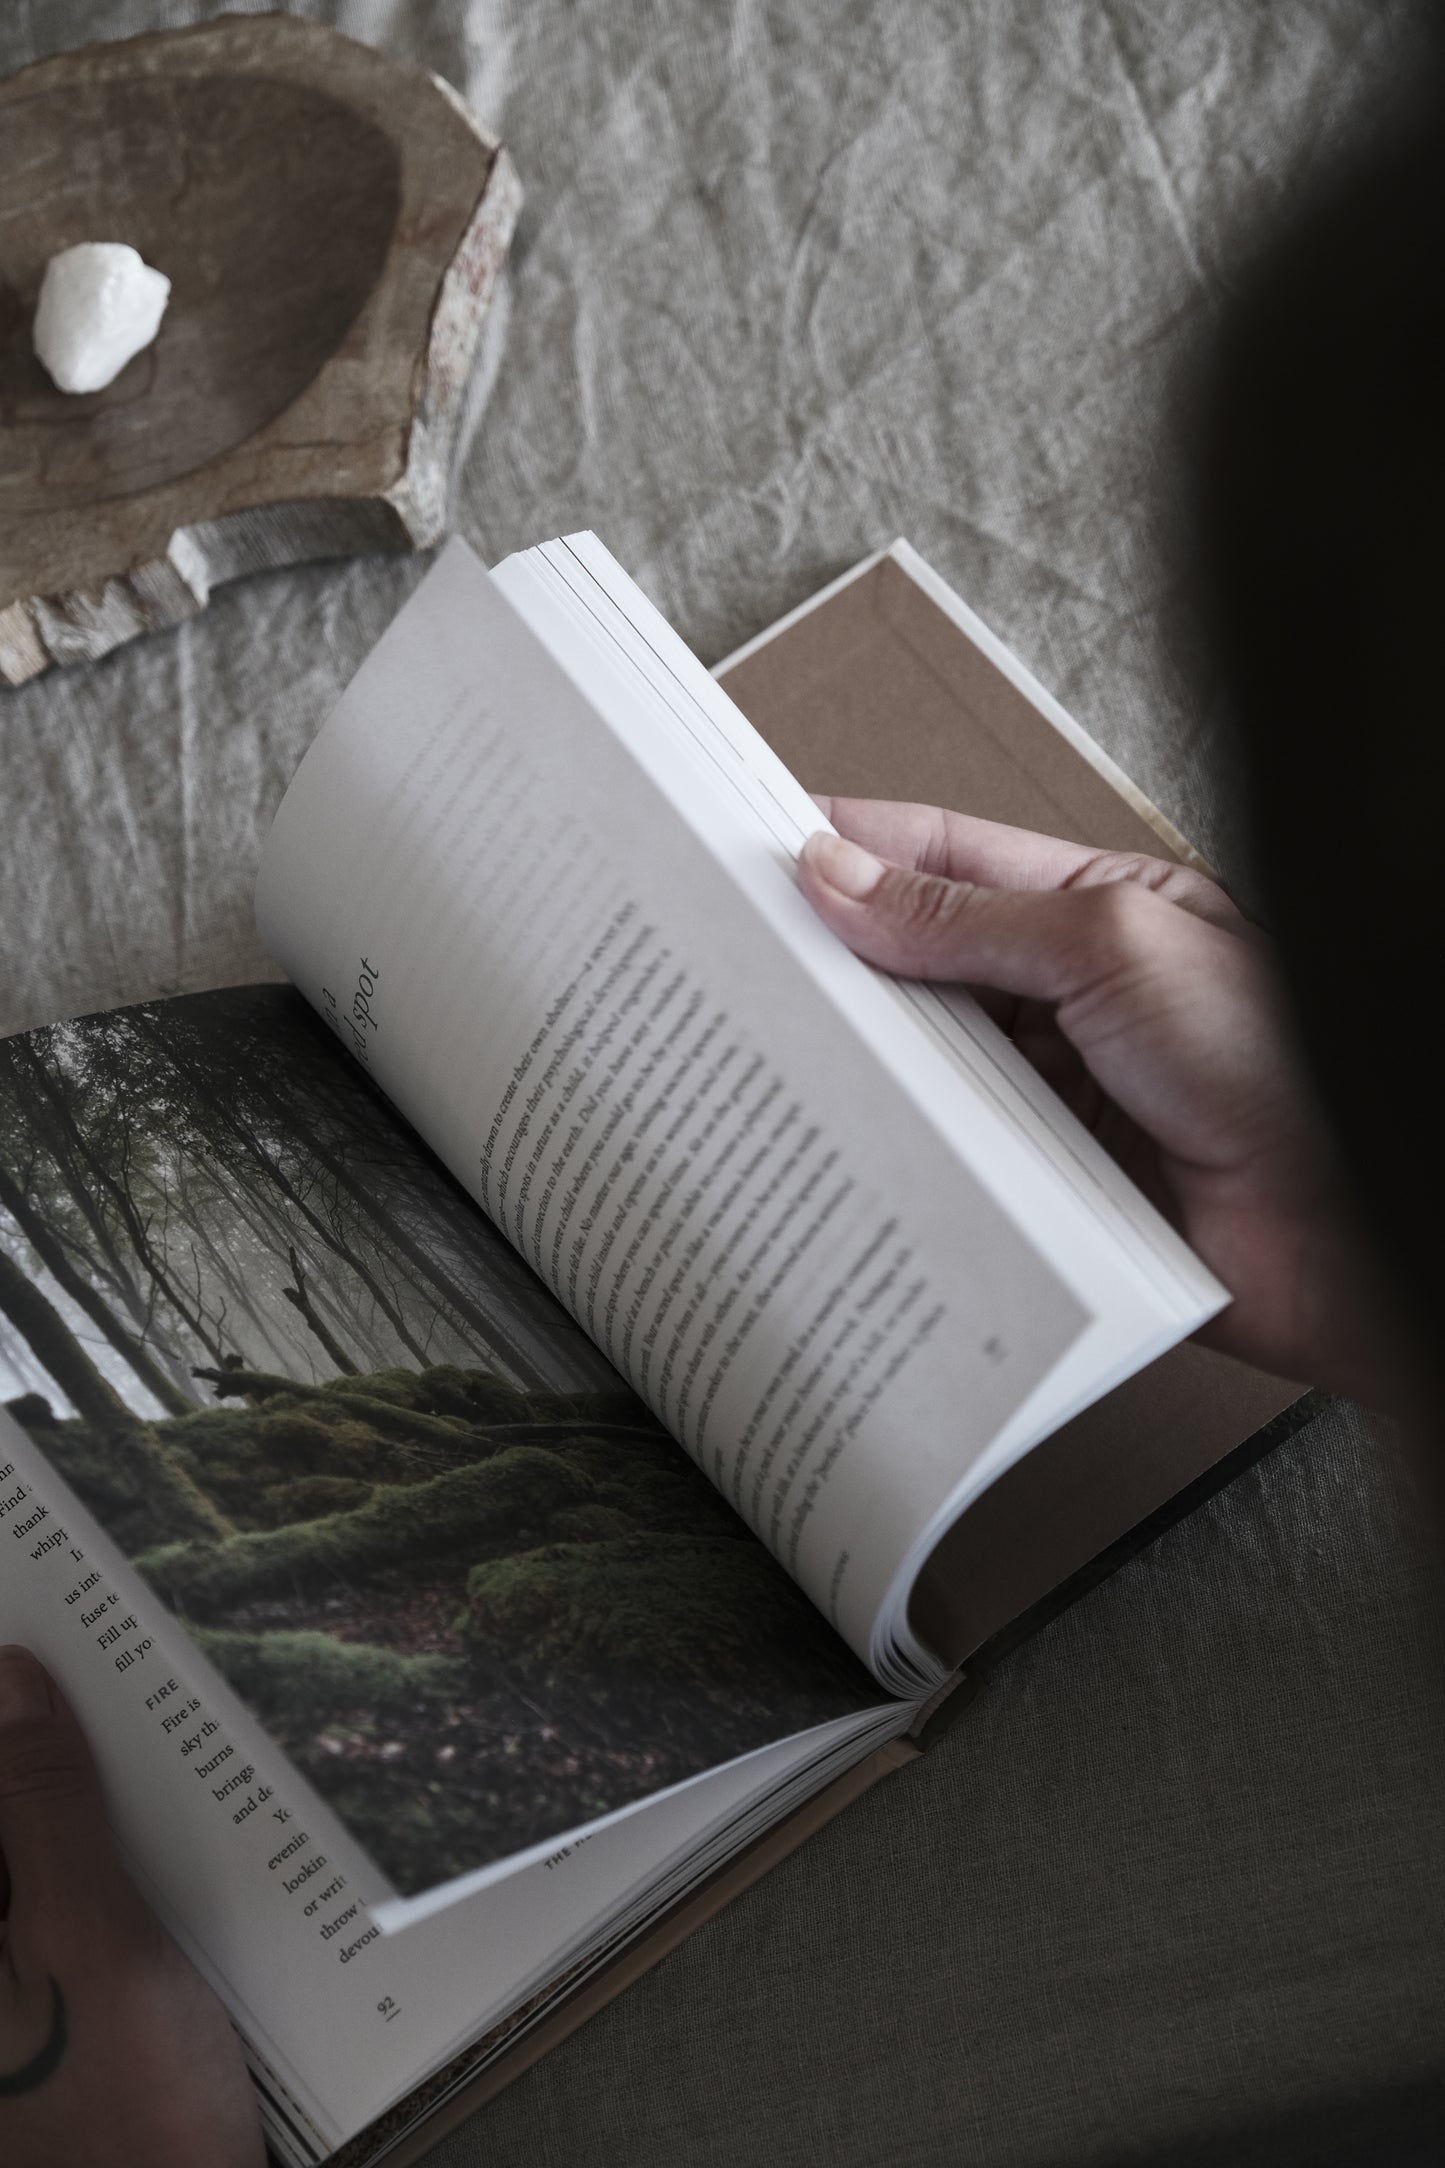 Image of the book Forest Bathing from Terra Cruda's book collection